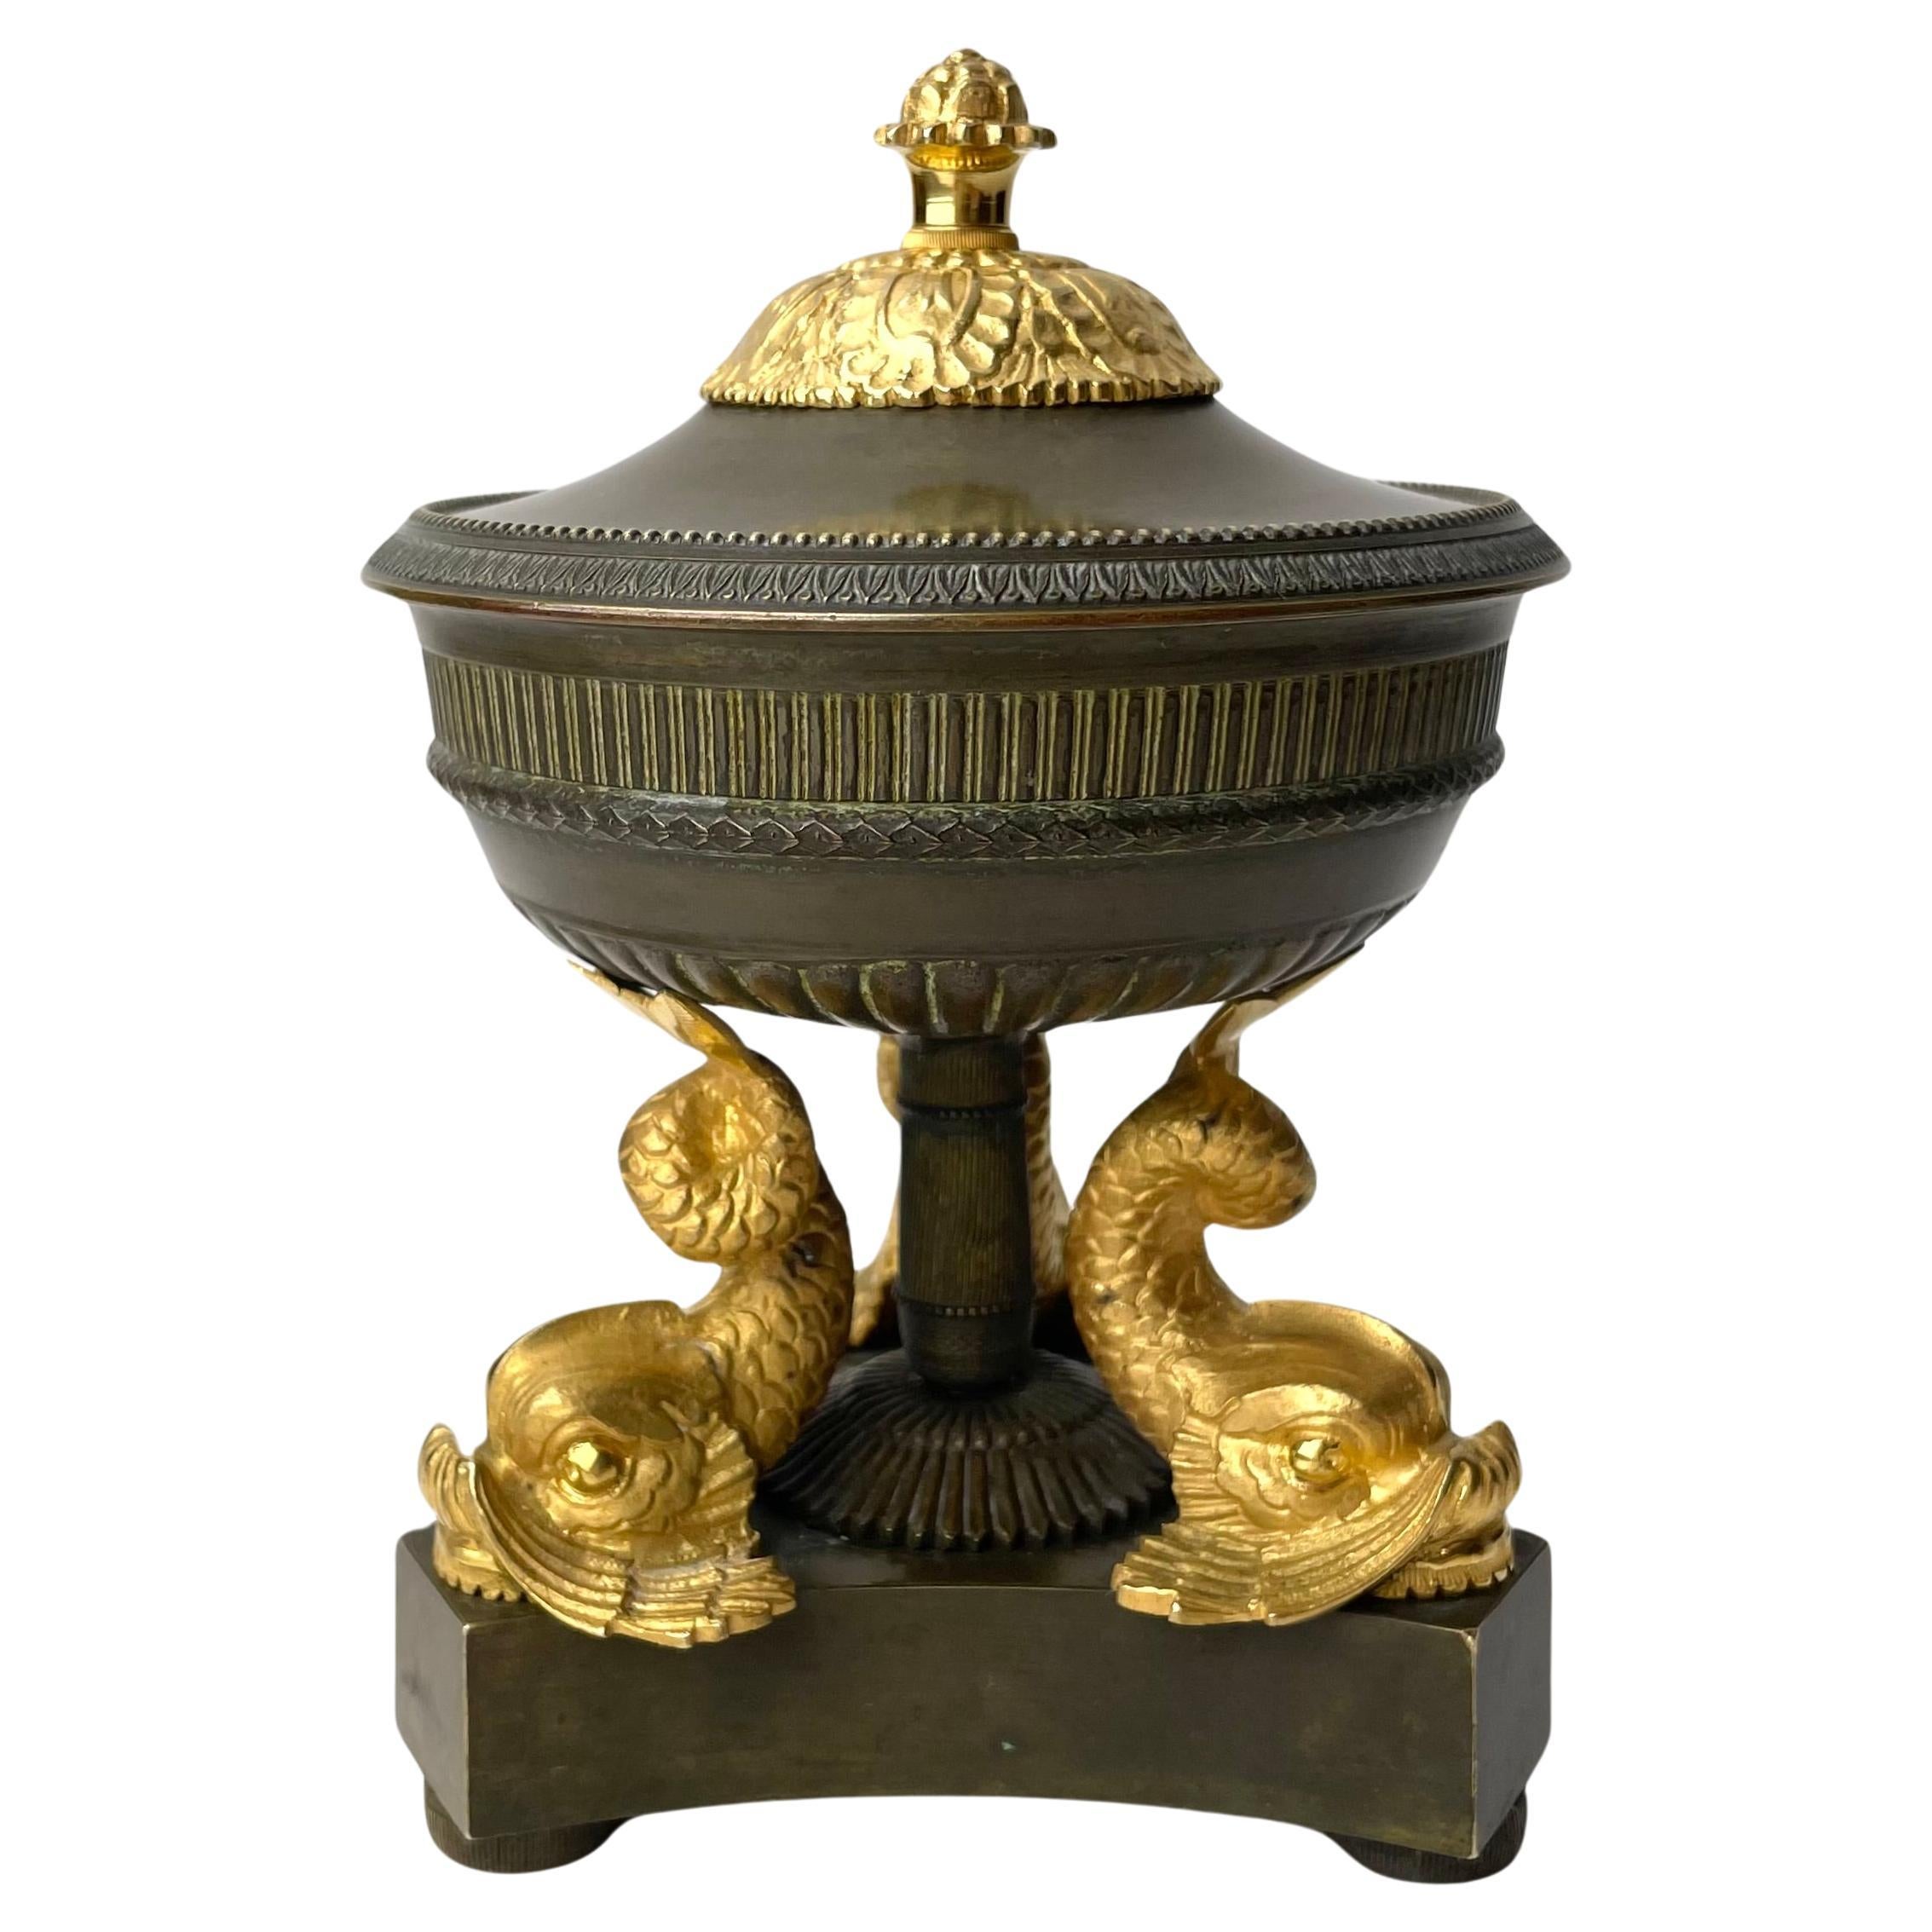 Elegant lid bowl in gilded and dark patinated bronze. French Empire